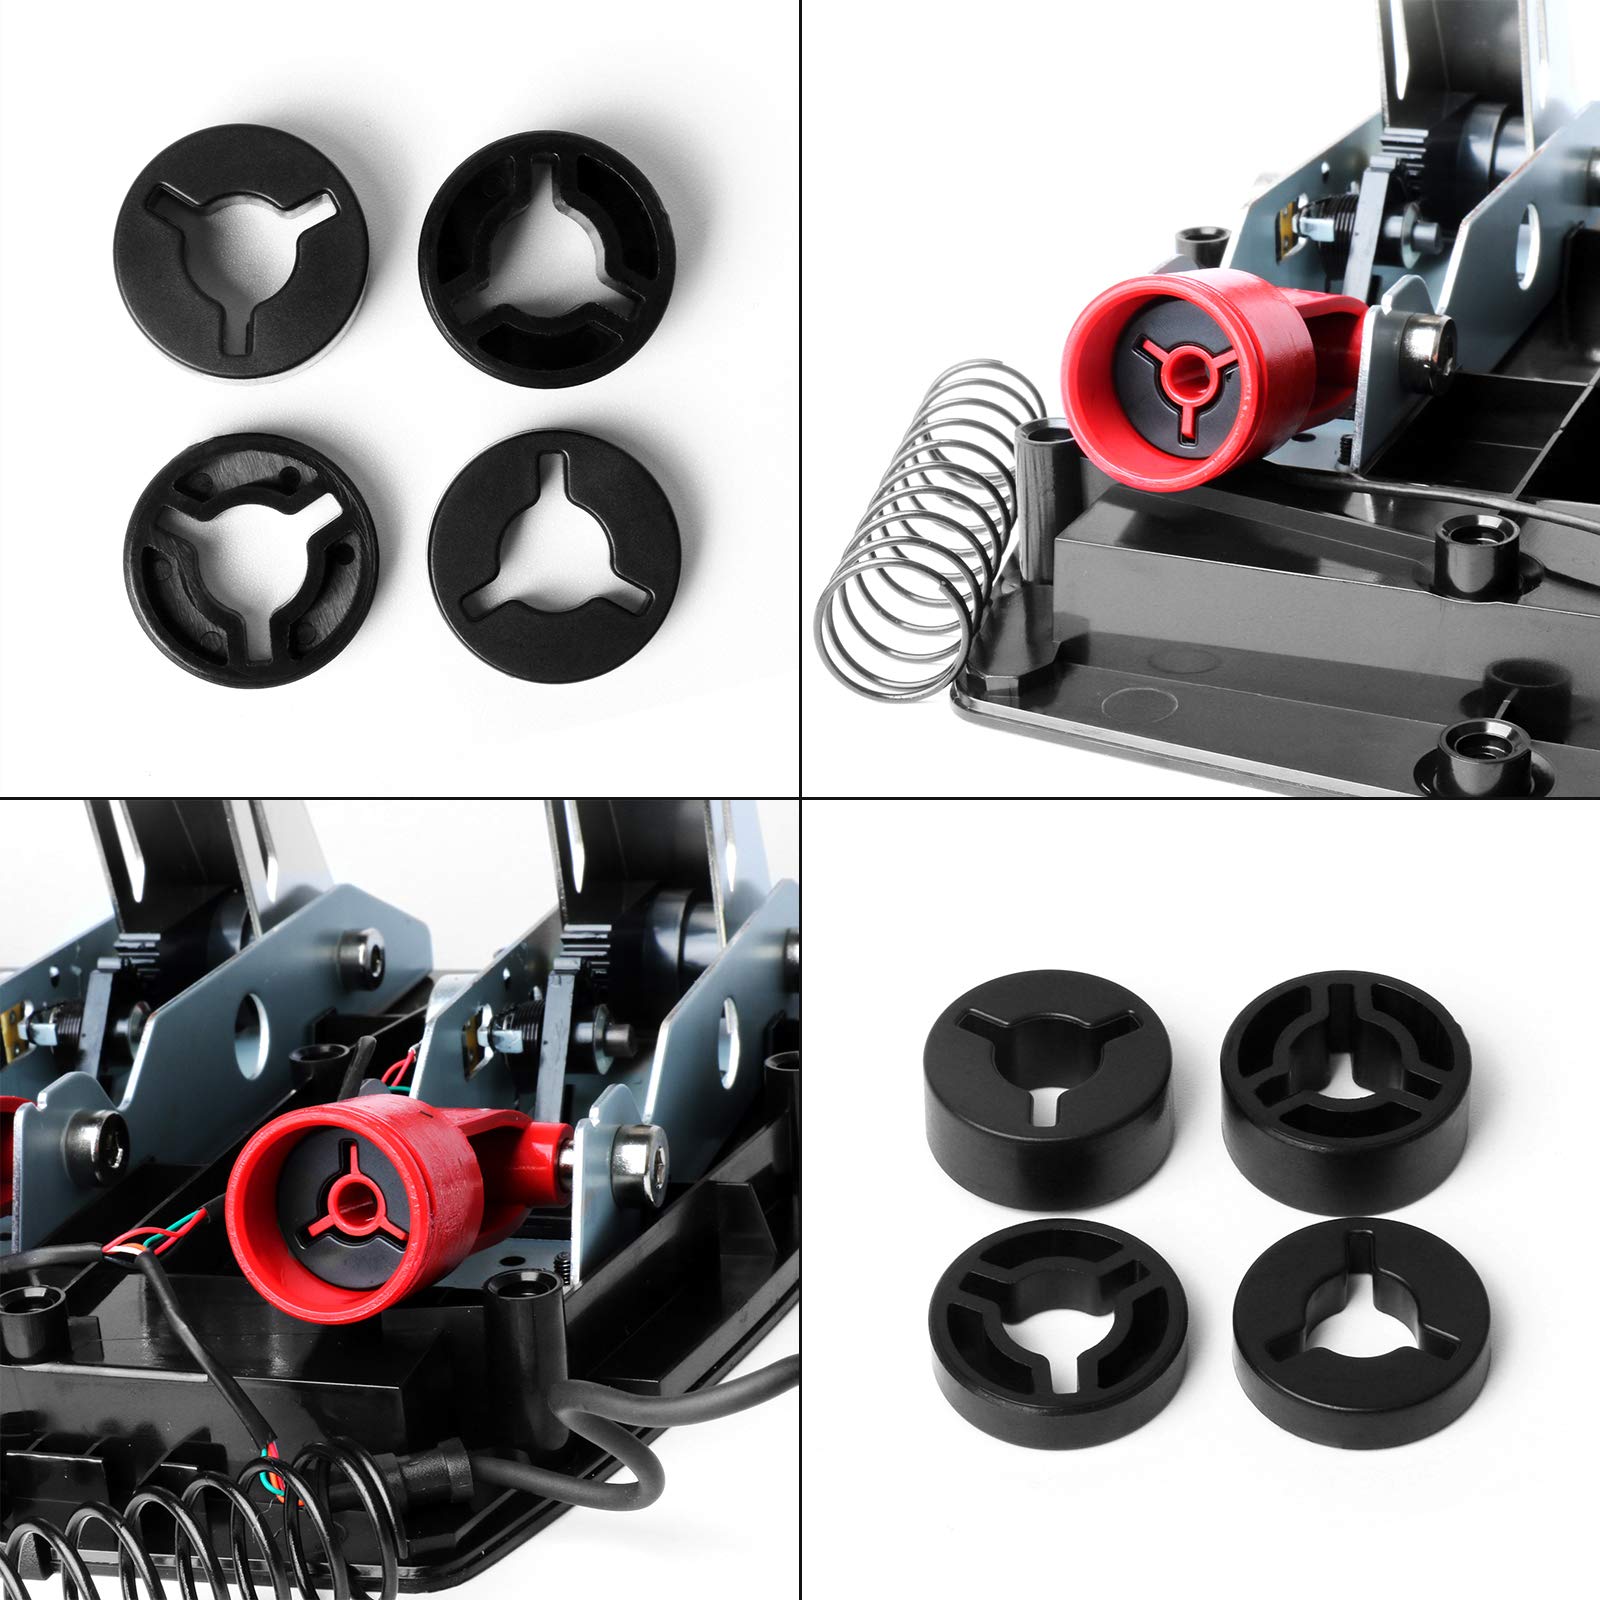 HUAYUWA Soft Damping Block Universal Pedal Modification Kit Fit for Logitech G25/G27/G29 Gaming Racing Wheel Upgrade Accessories